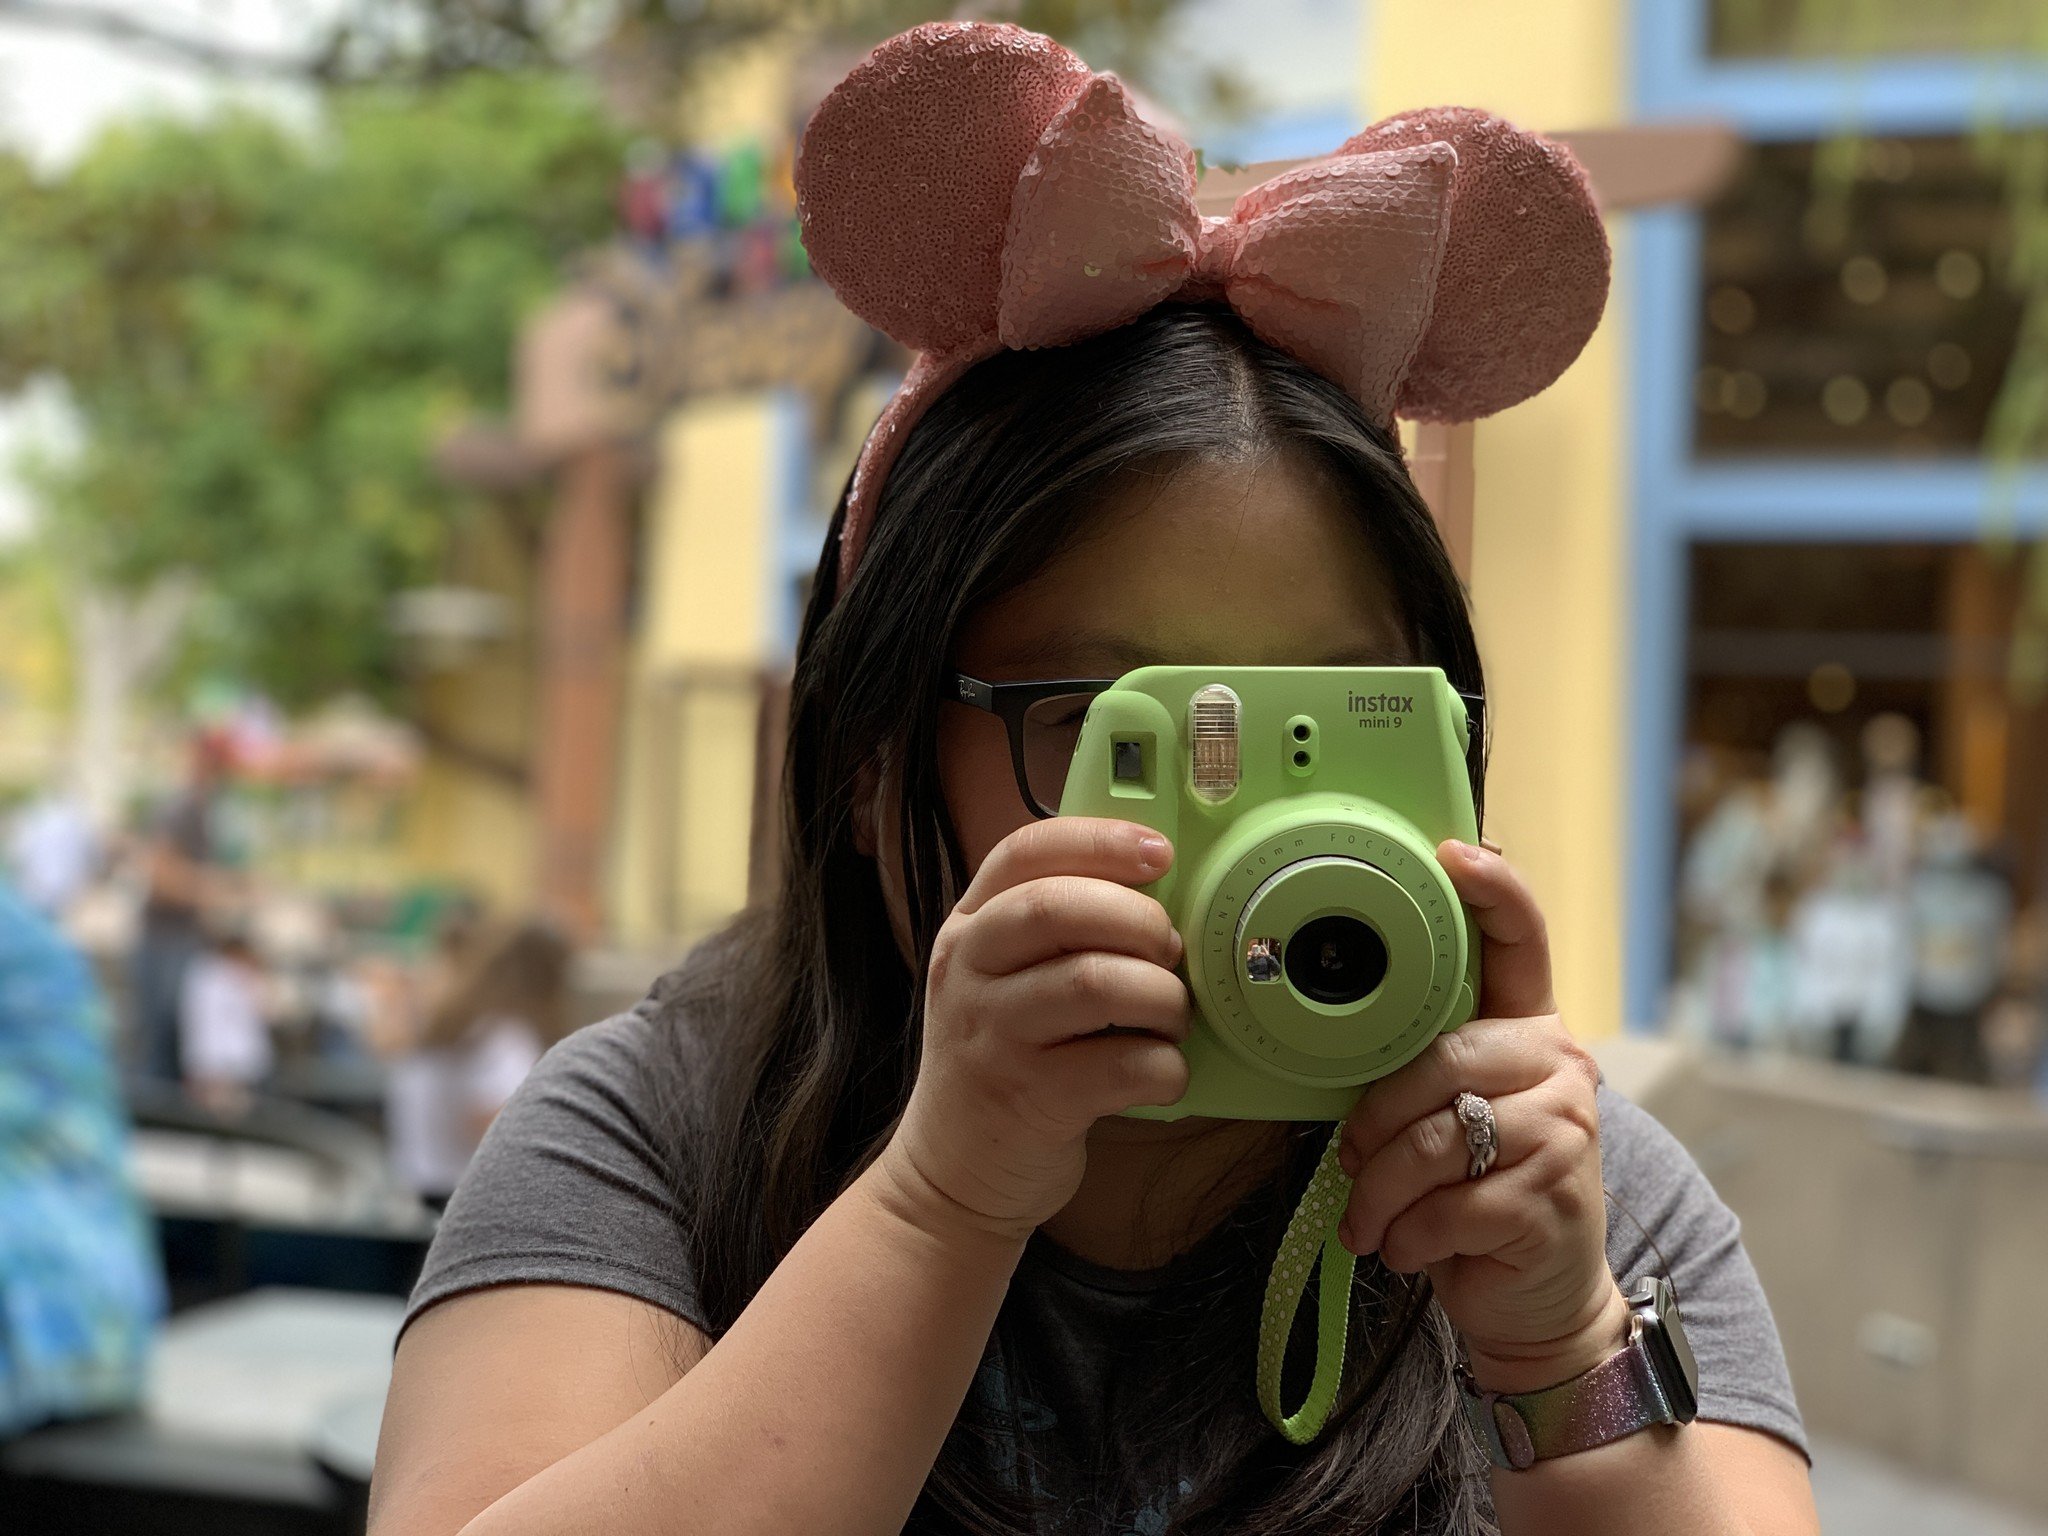 Fujifilm's Instax Mini 9 is colorful and selfie friendly